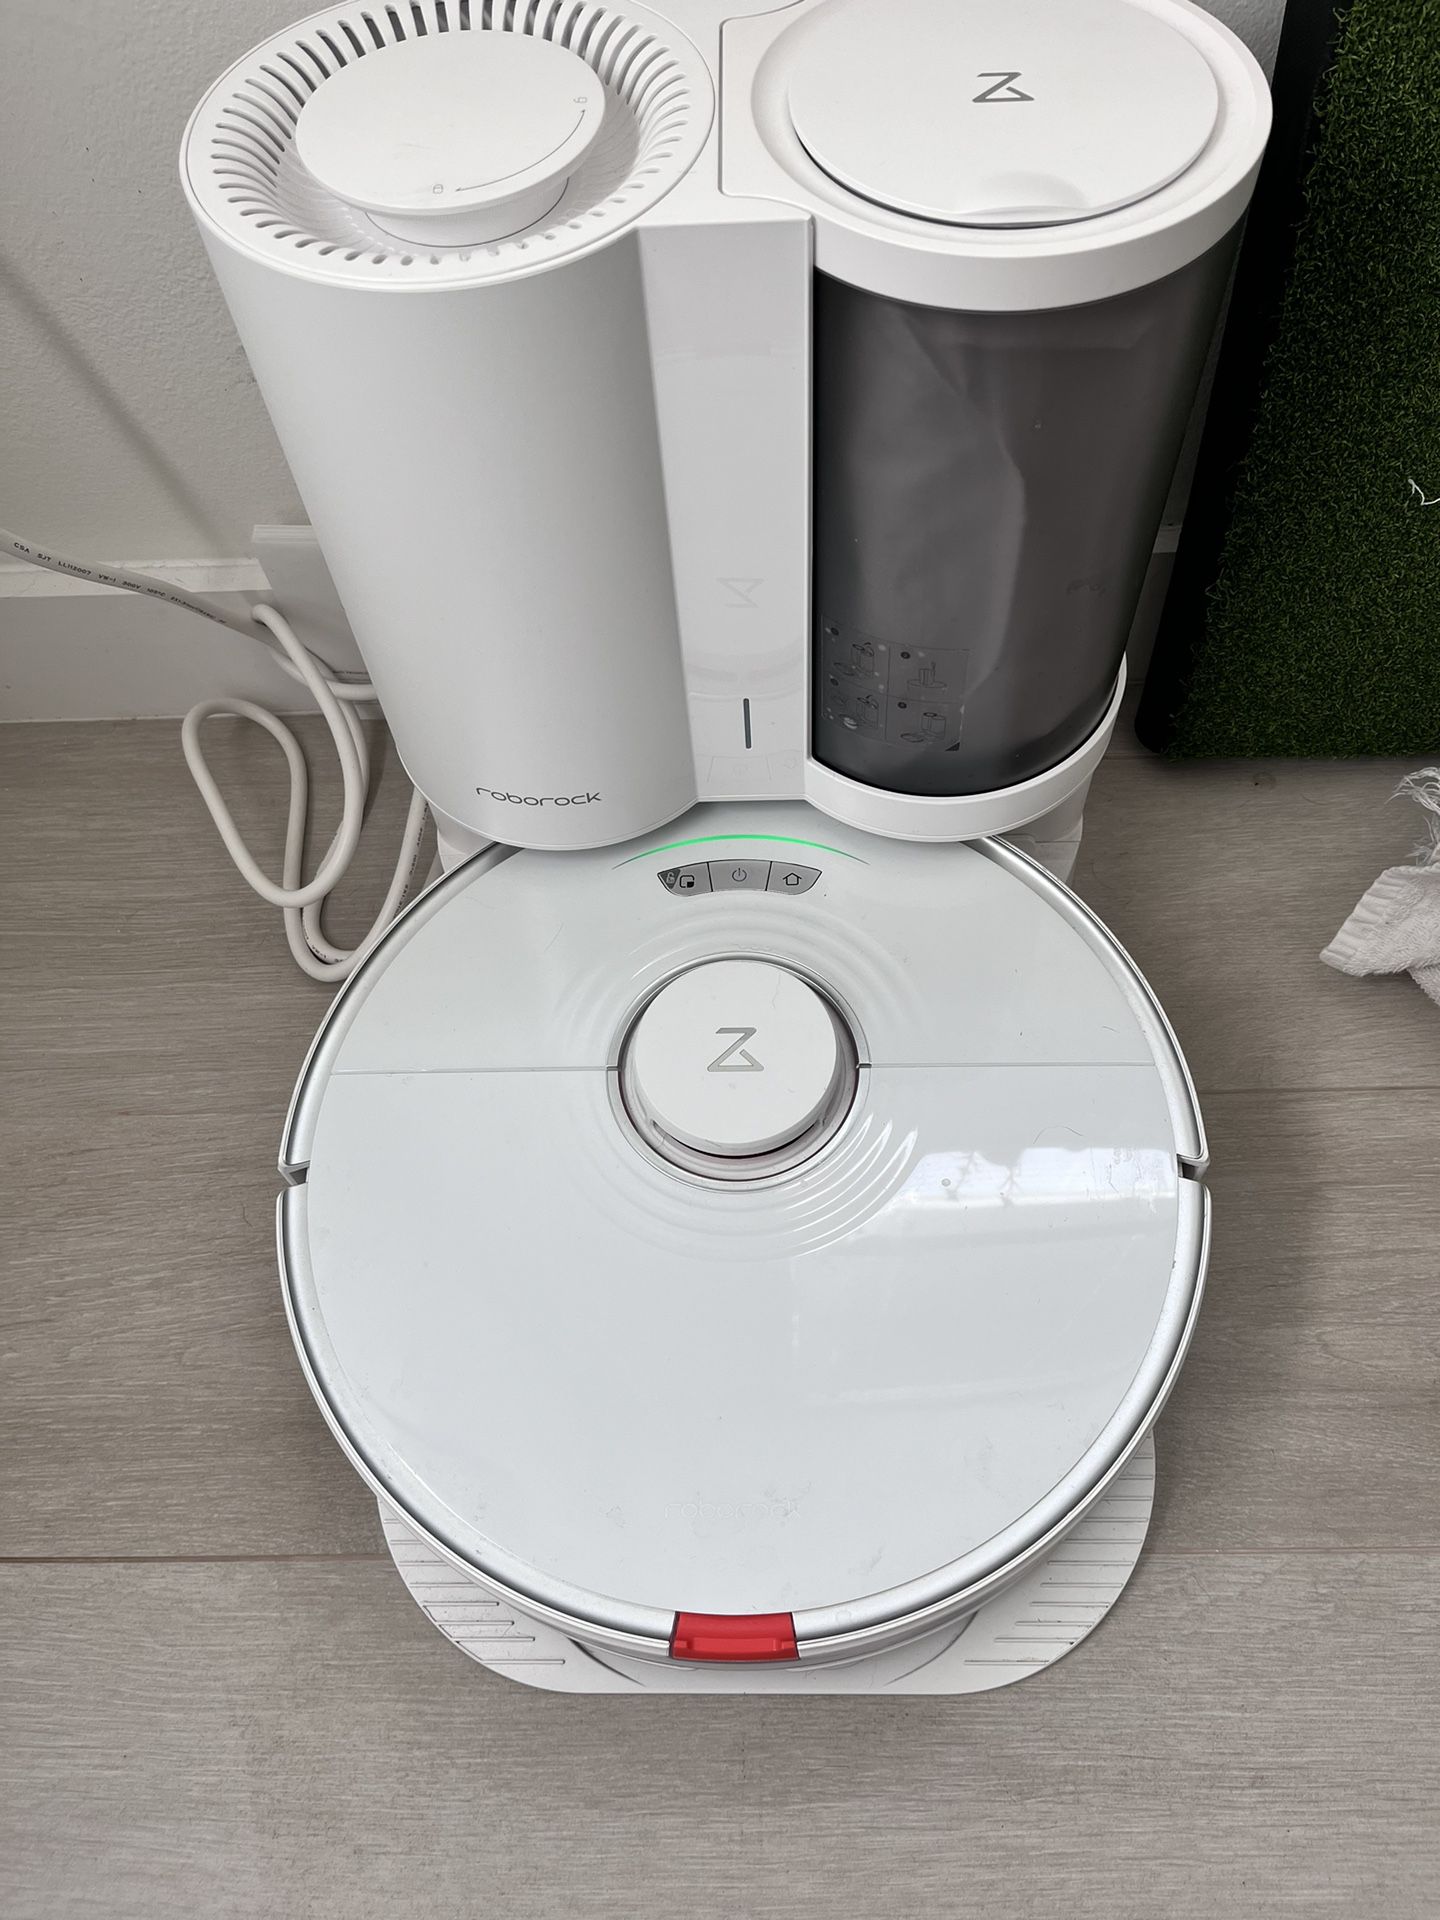 Roborock S7 Robot vacuum With Mopping Capability. Pristine Condition